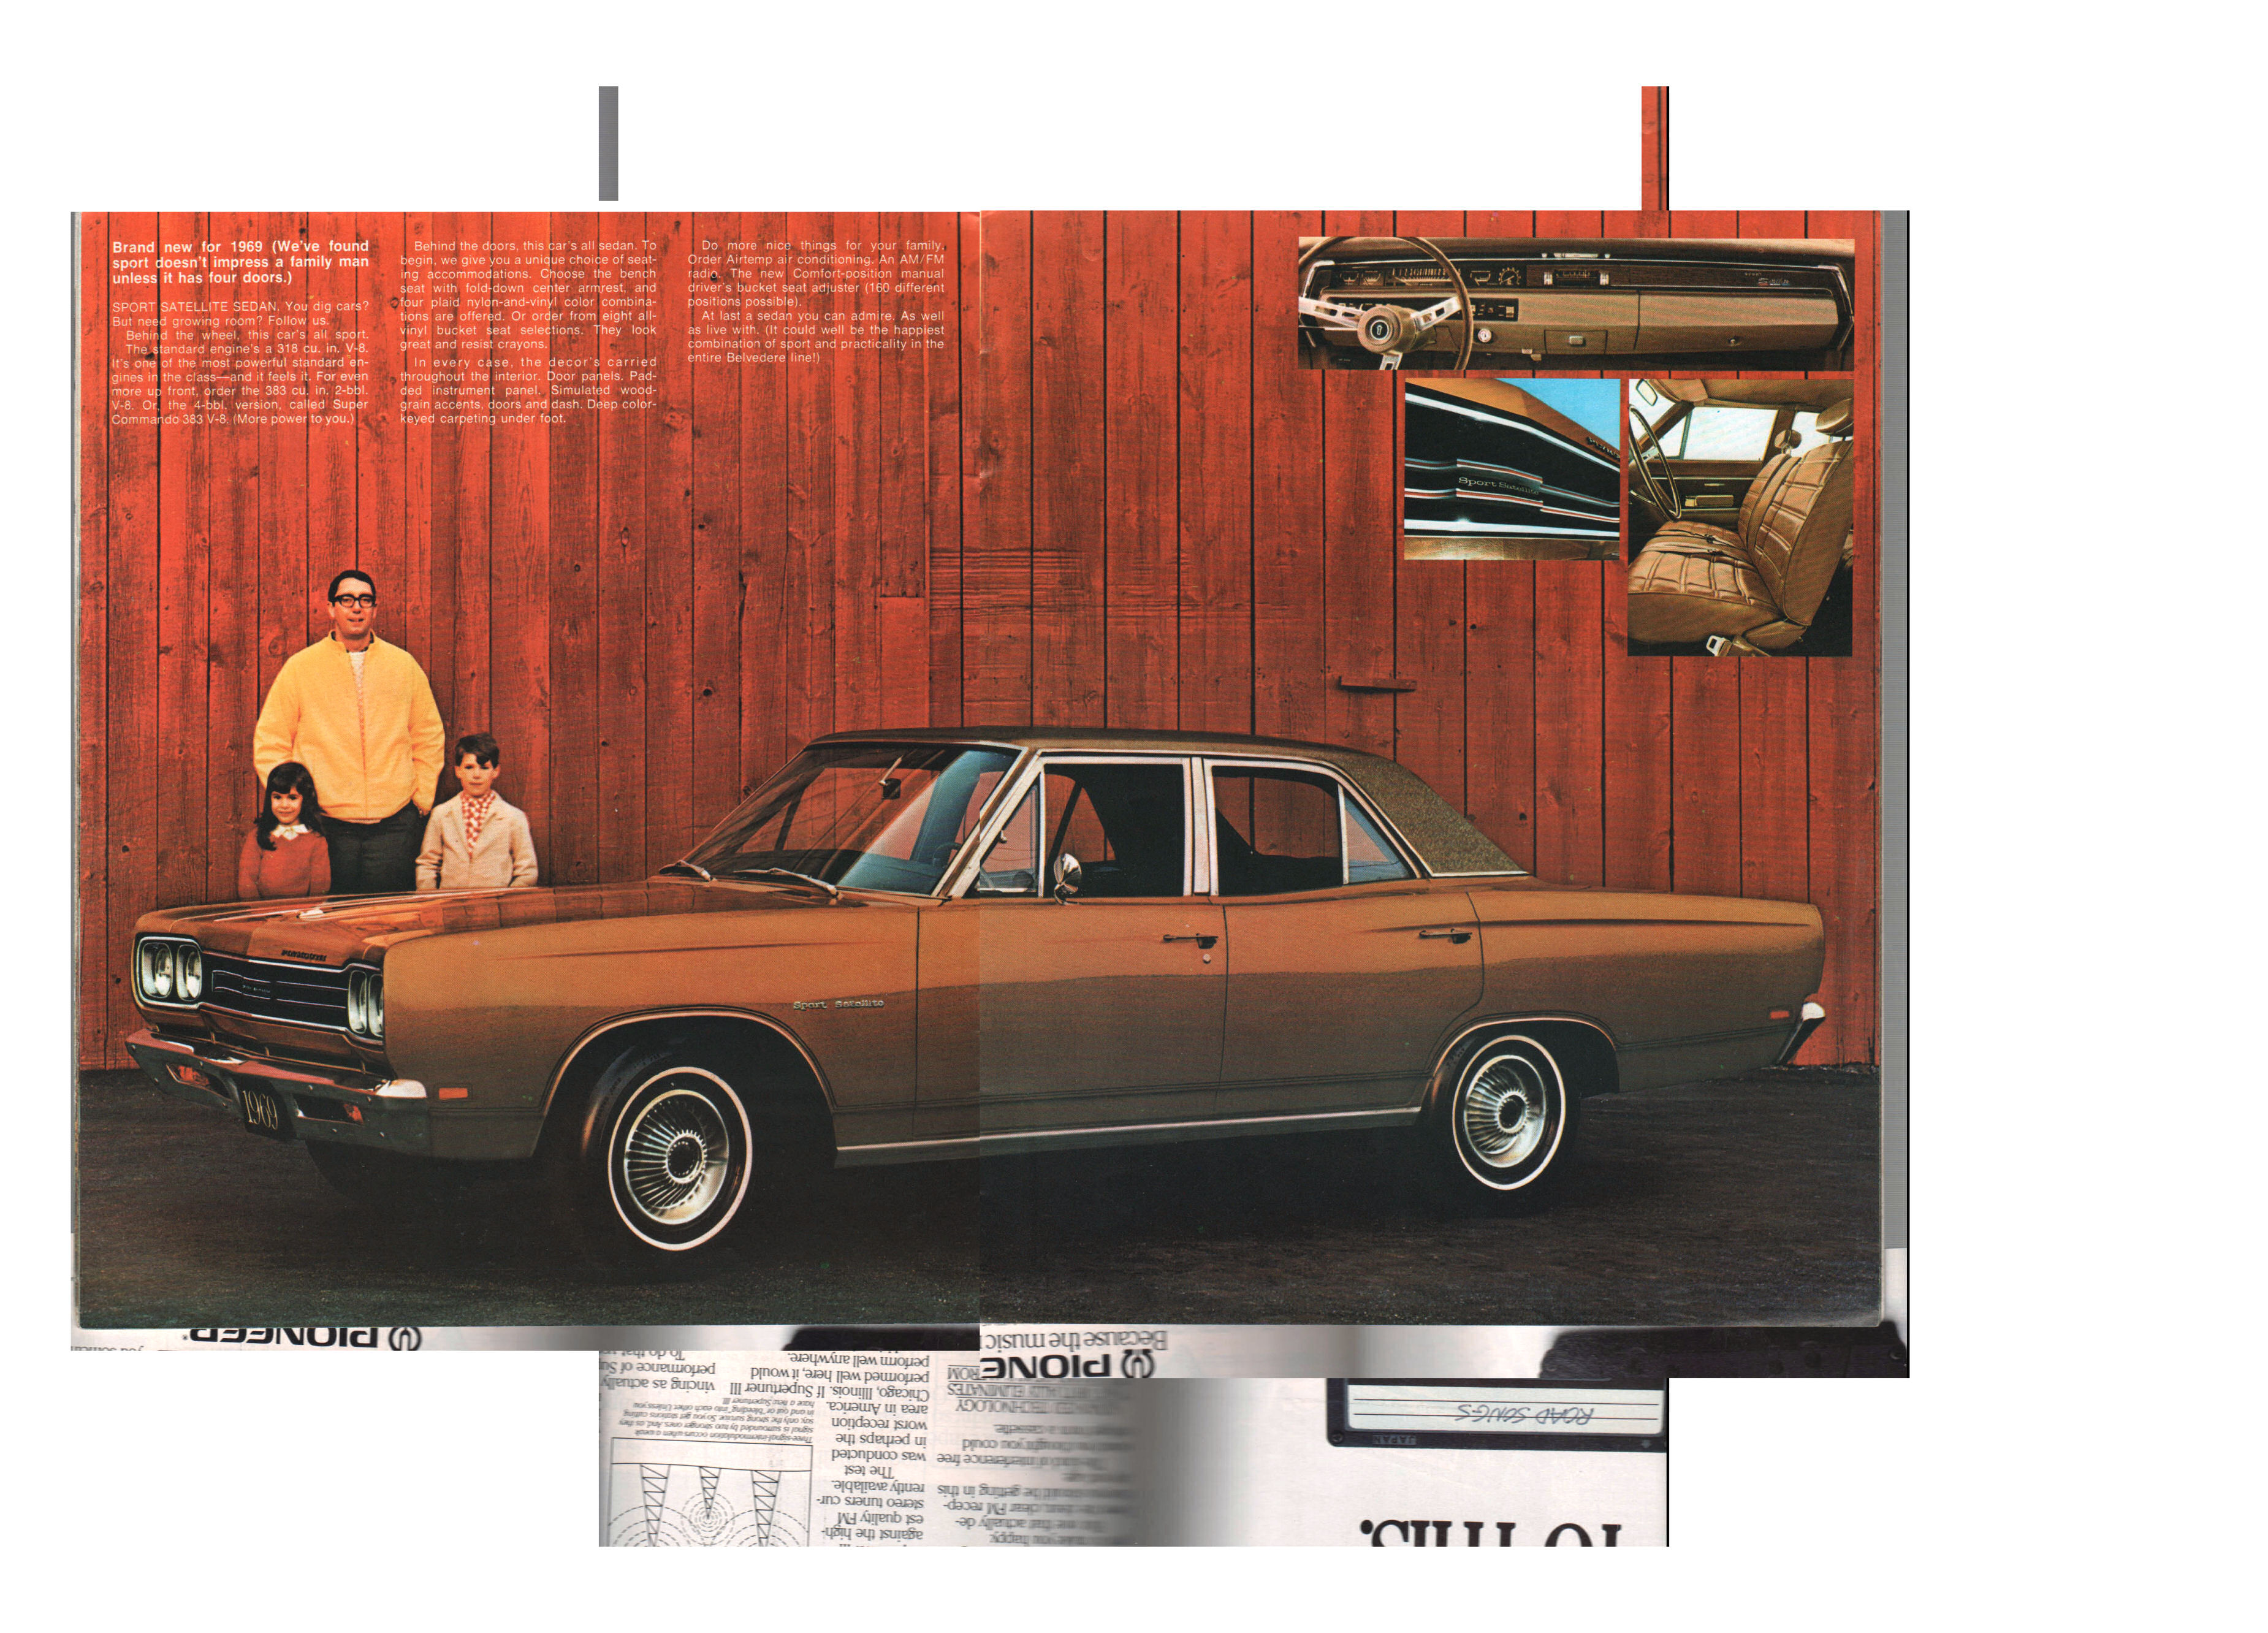 1969_Plymouth_Belvedere-12-13